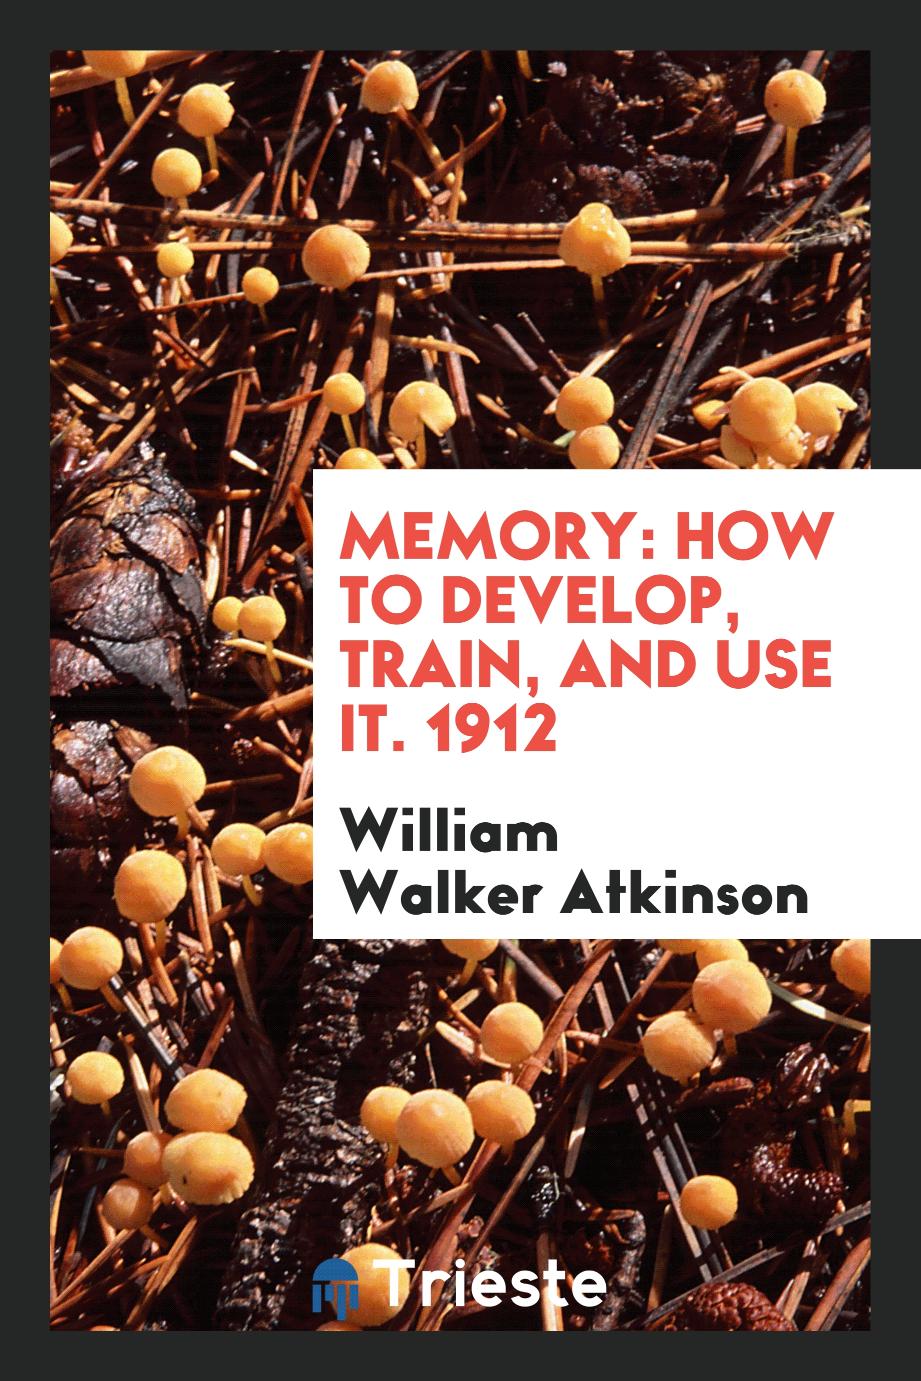 Memory: How to Develop, Train, and Use It. 1912